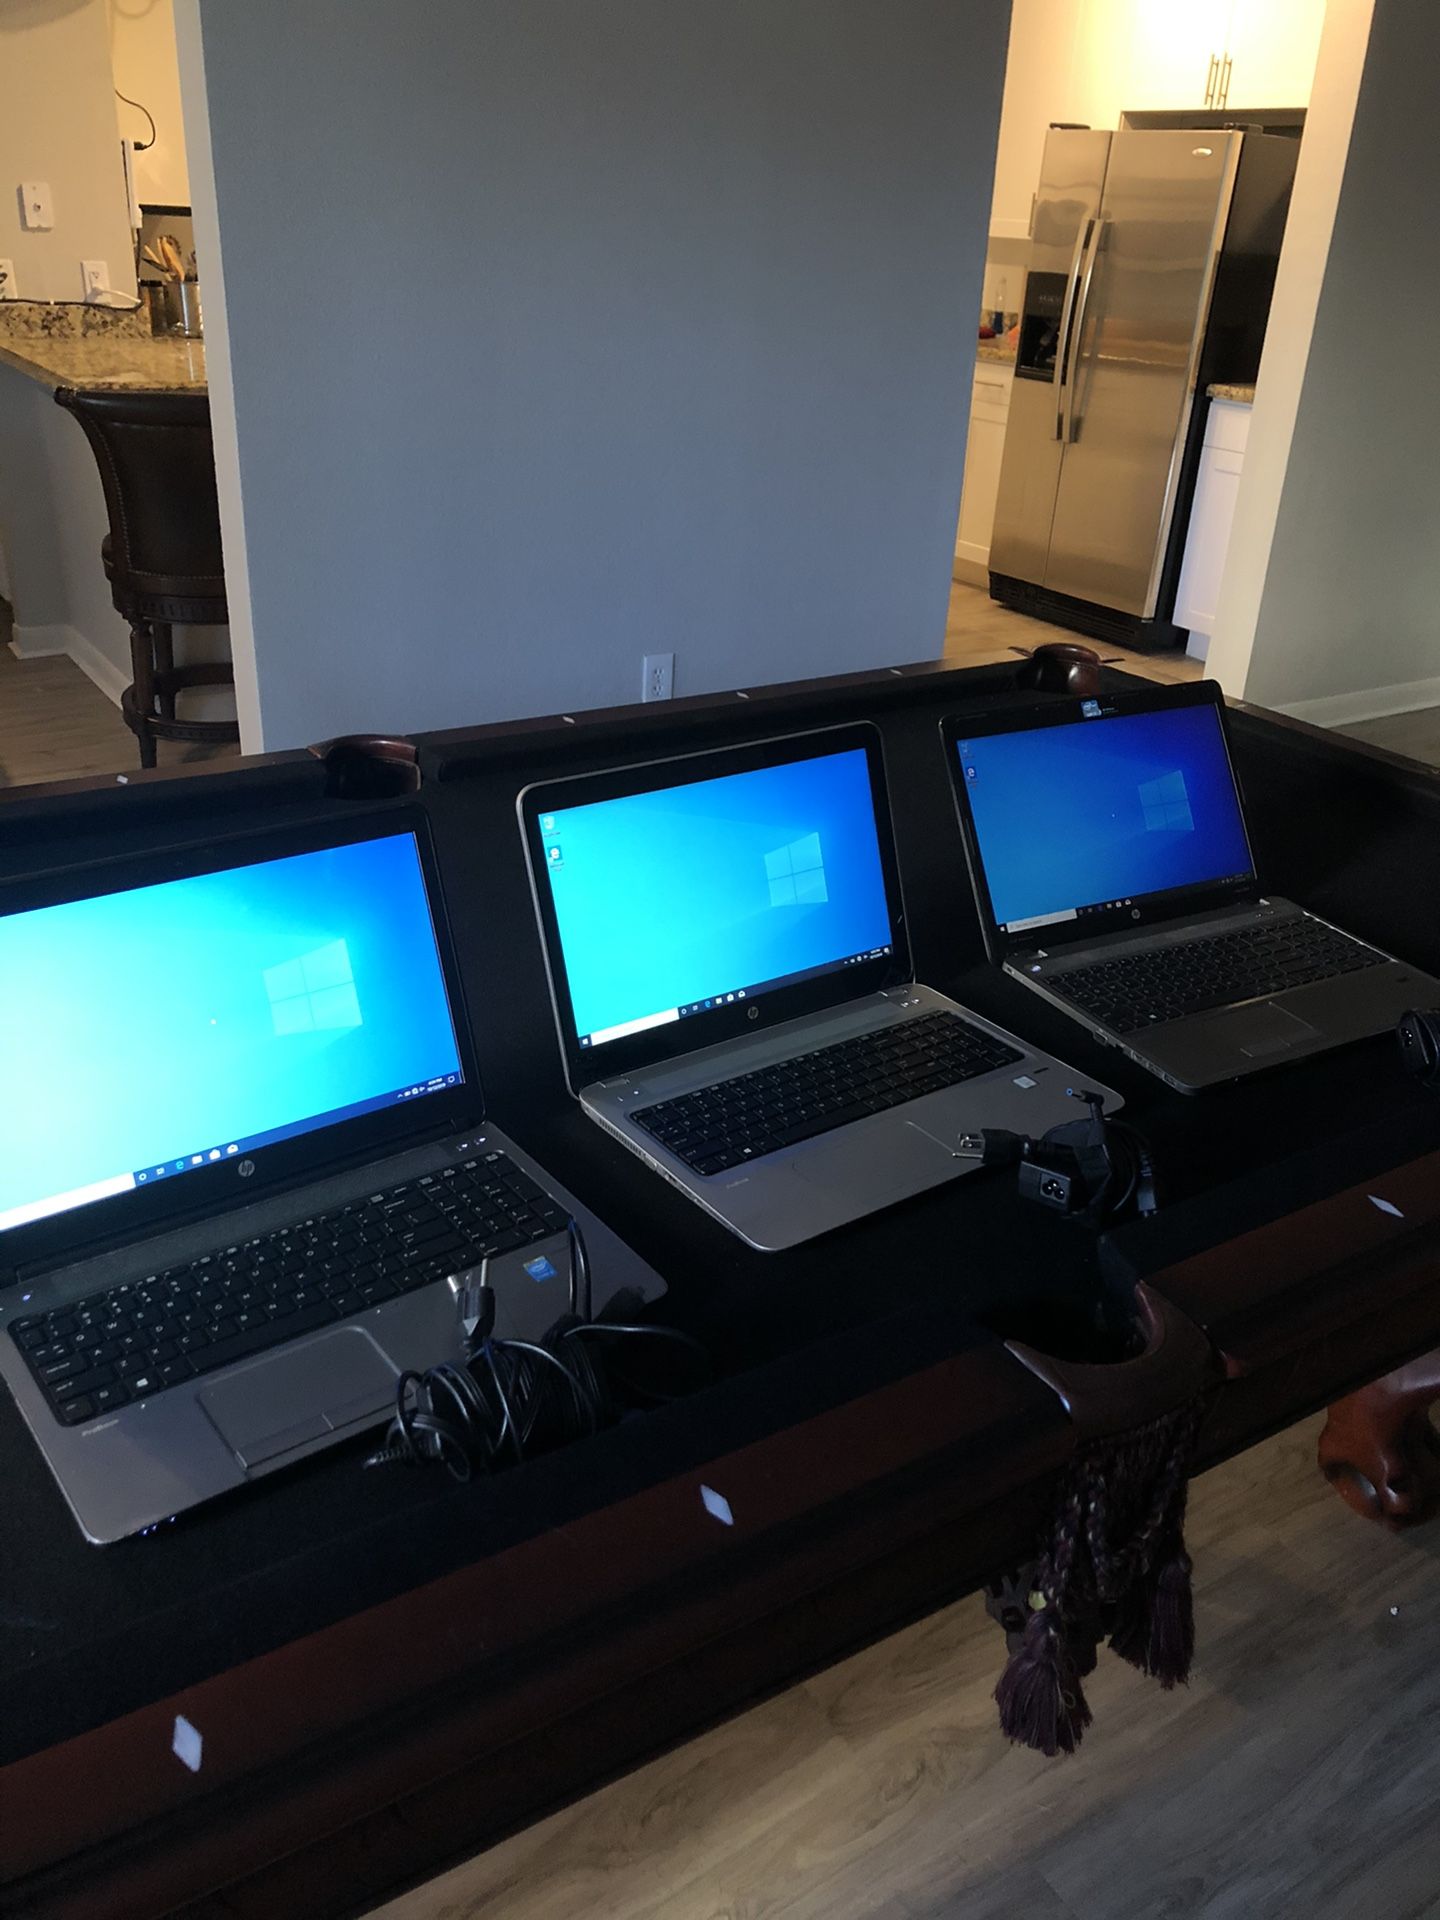 3 HP Laptops! All i5 / Good Condition